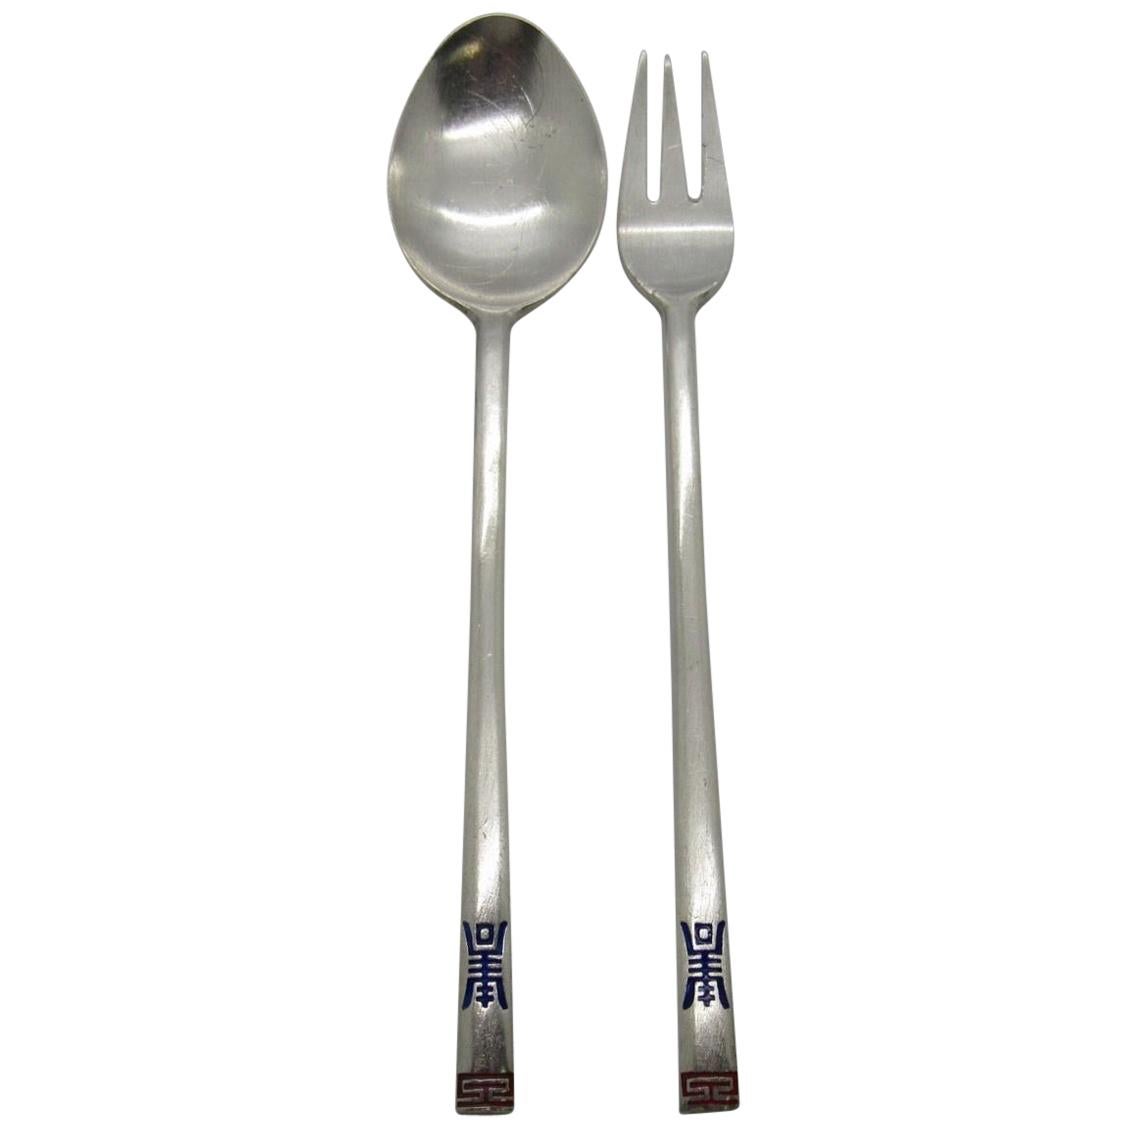 Korean 80% Silver Youth Spoon and Fork Set